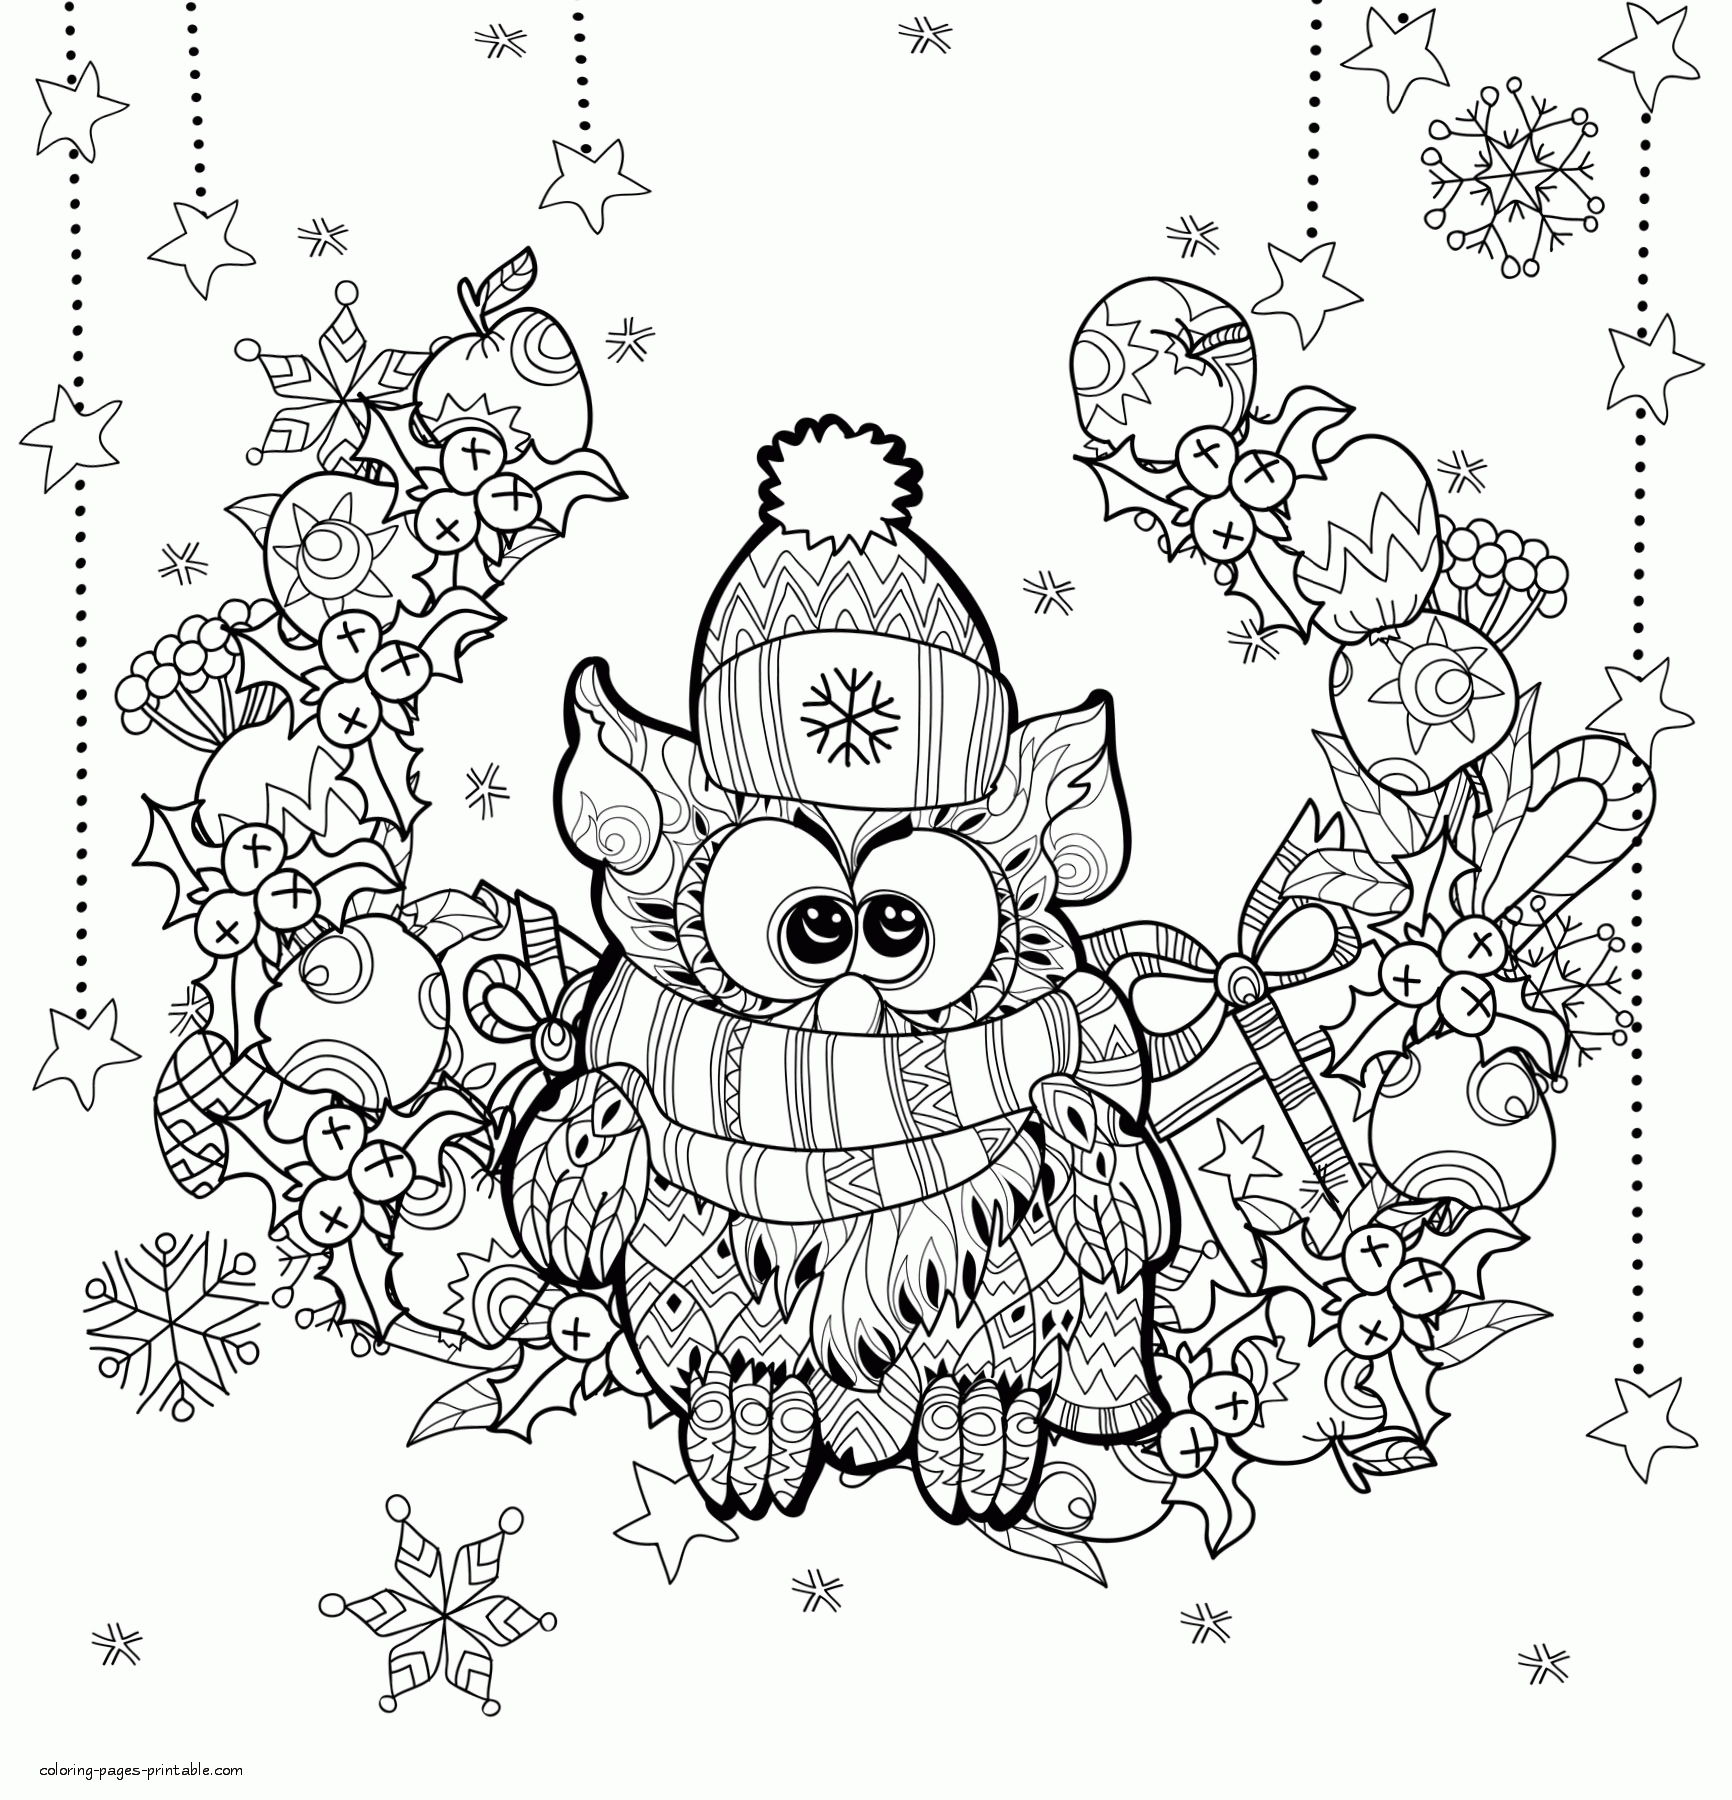 Christmas Coloring Page For Adult. Winter dressed Owl 